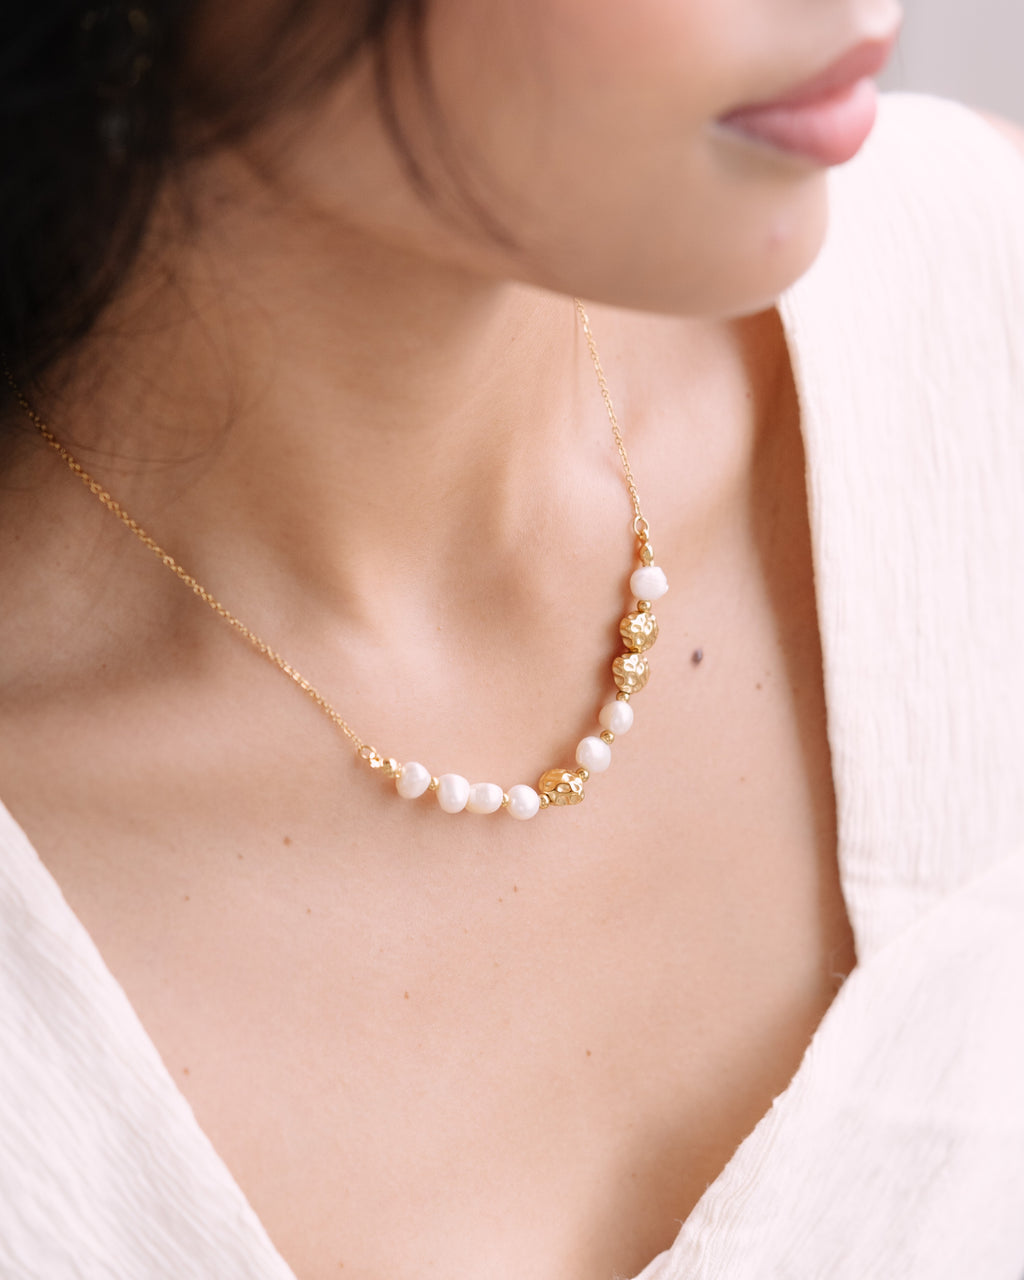 Texture with pearls necklace